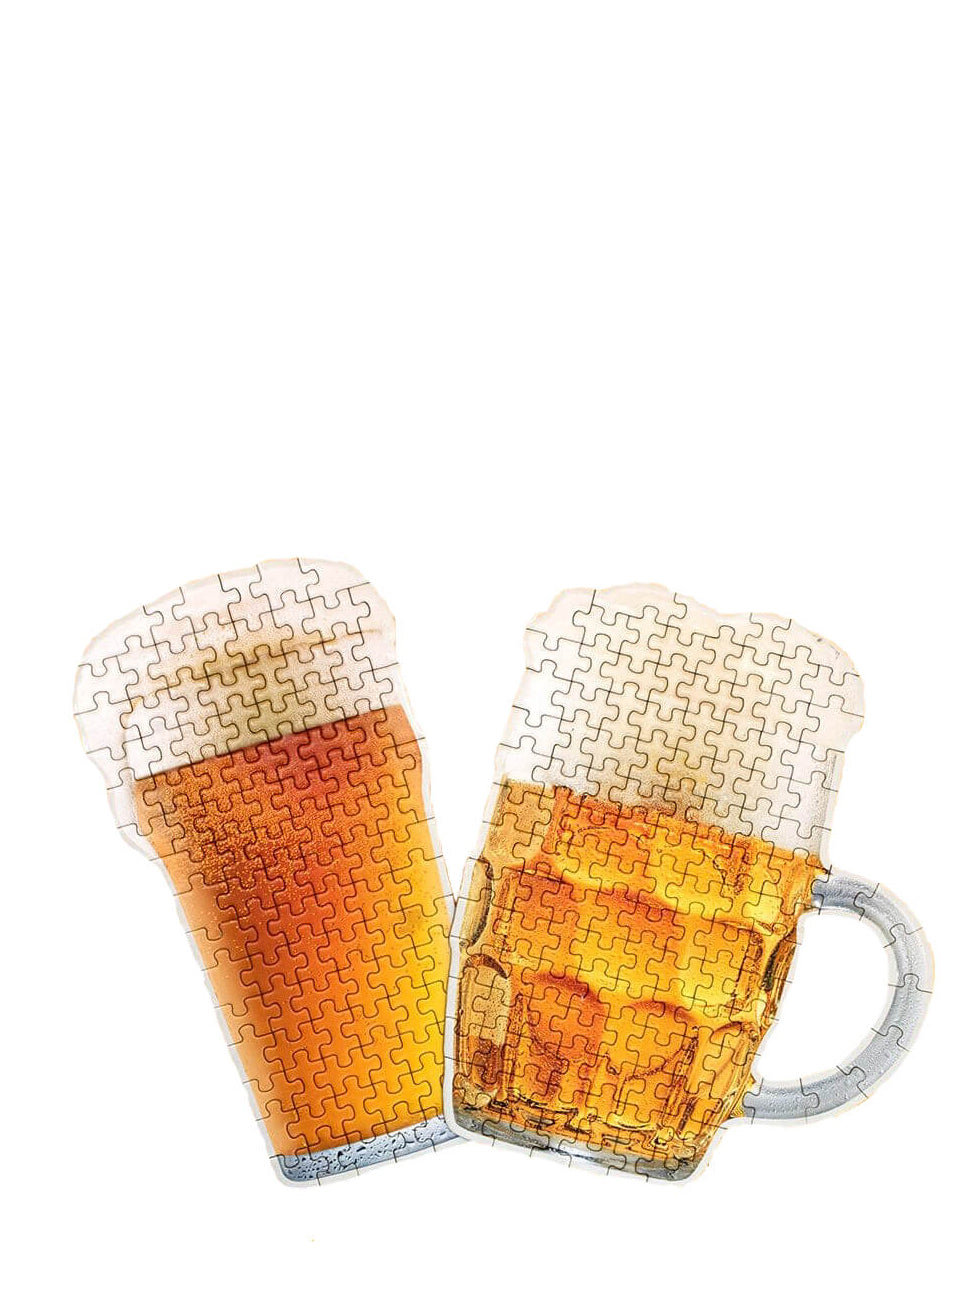 Ale Beer Can Puzzles, 100 pcs each